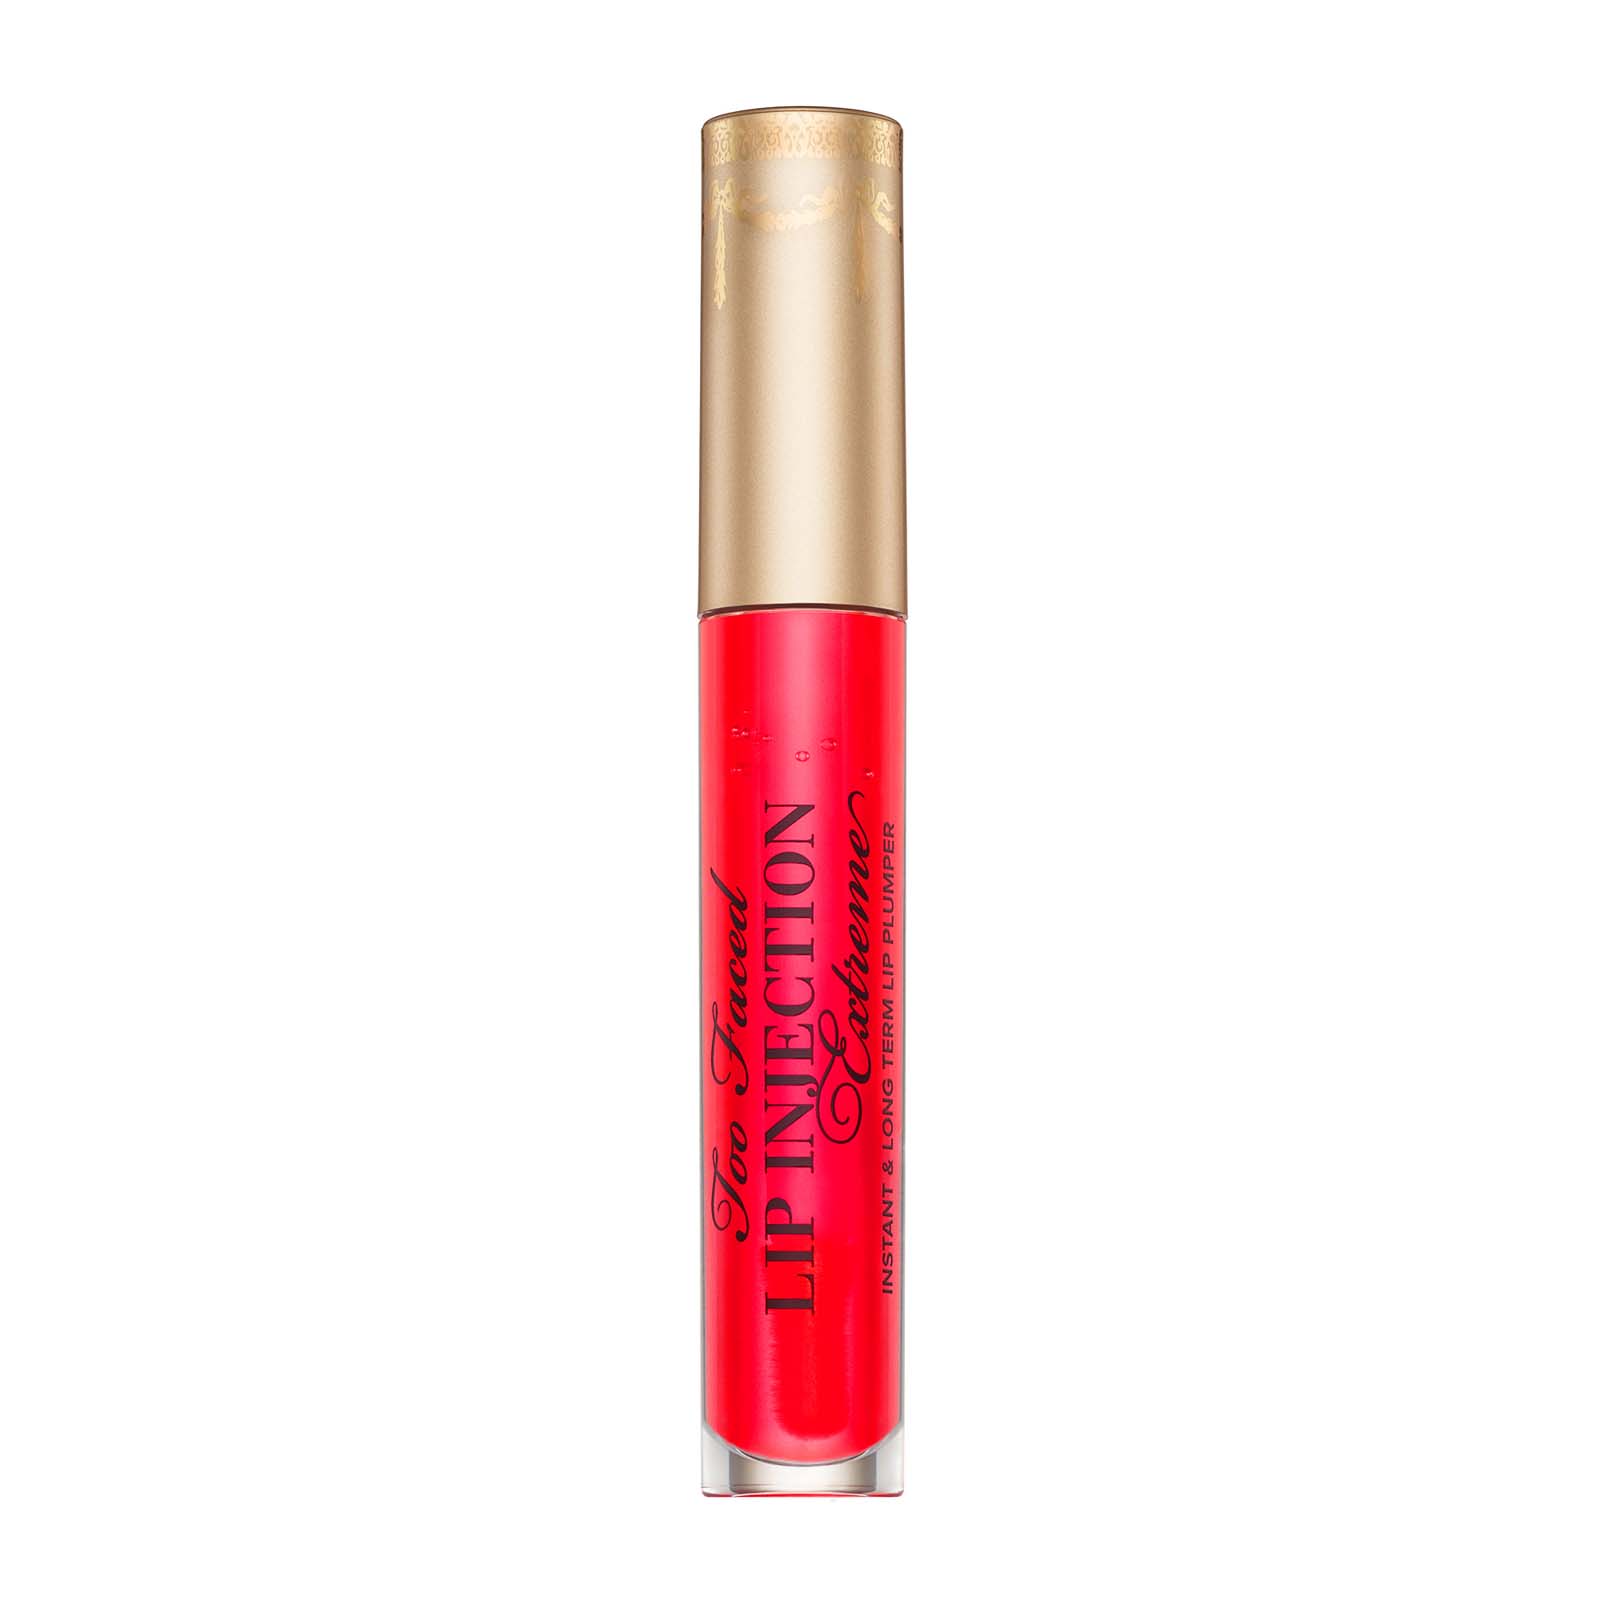 Too Faced Lip Injection Extreme Plumping Lip Gloss 4Ml Strawberry Kiss